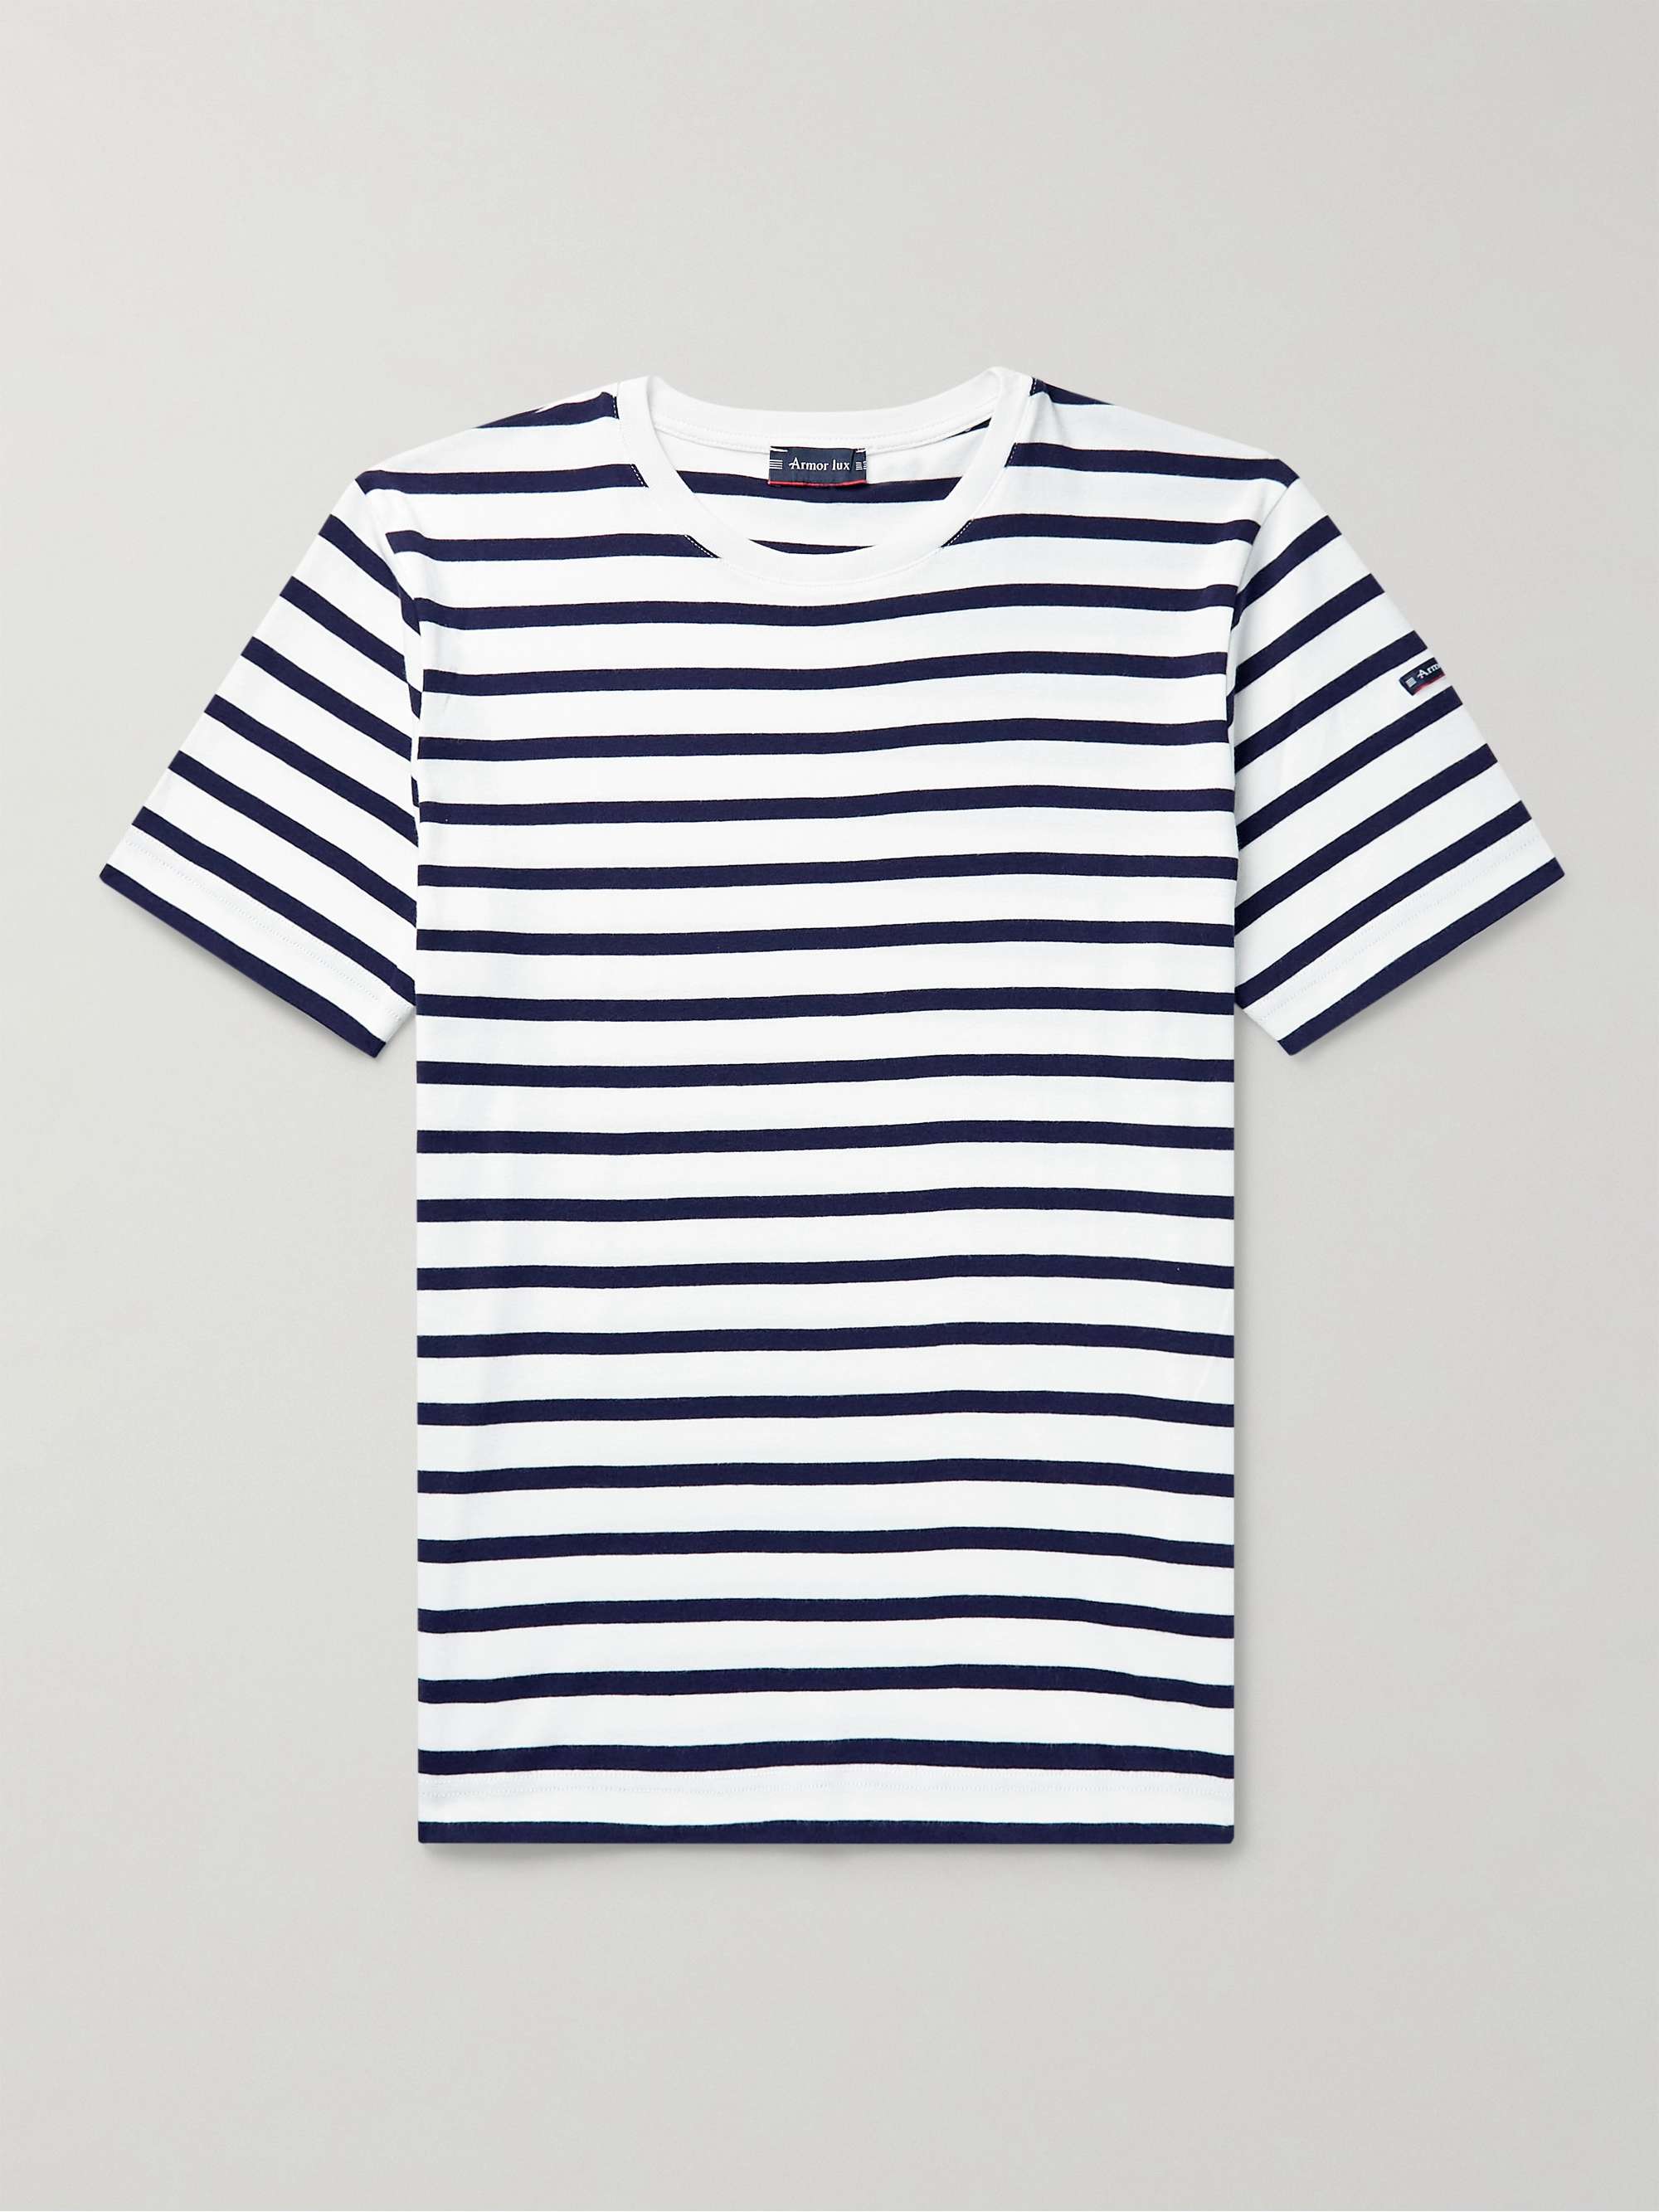 ARMOR-LUX Slim-Fit Striped Cotton-Jersey T-Shirt